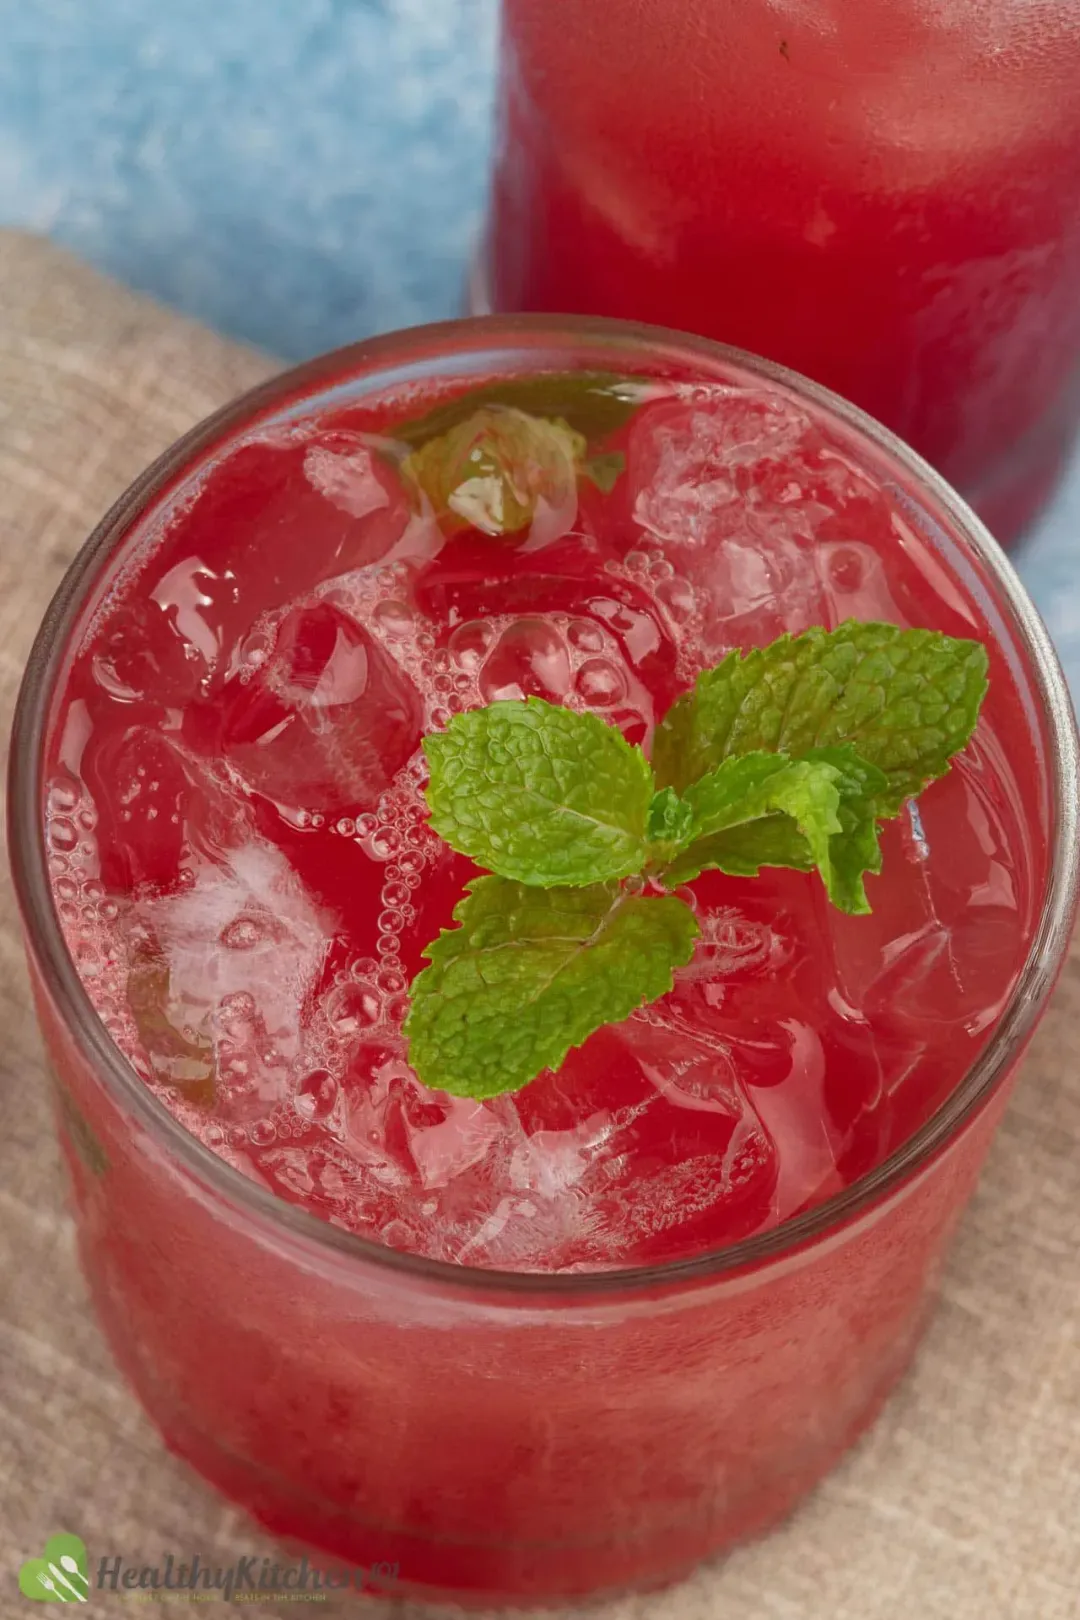 A high angle of short of a glass of watermelon juice filled with ice and have a mint leave on top